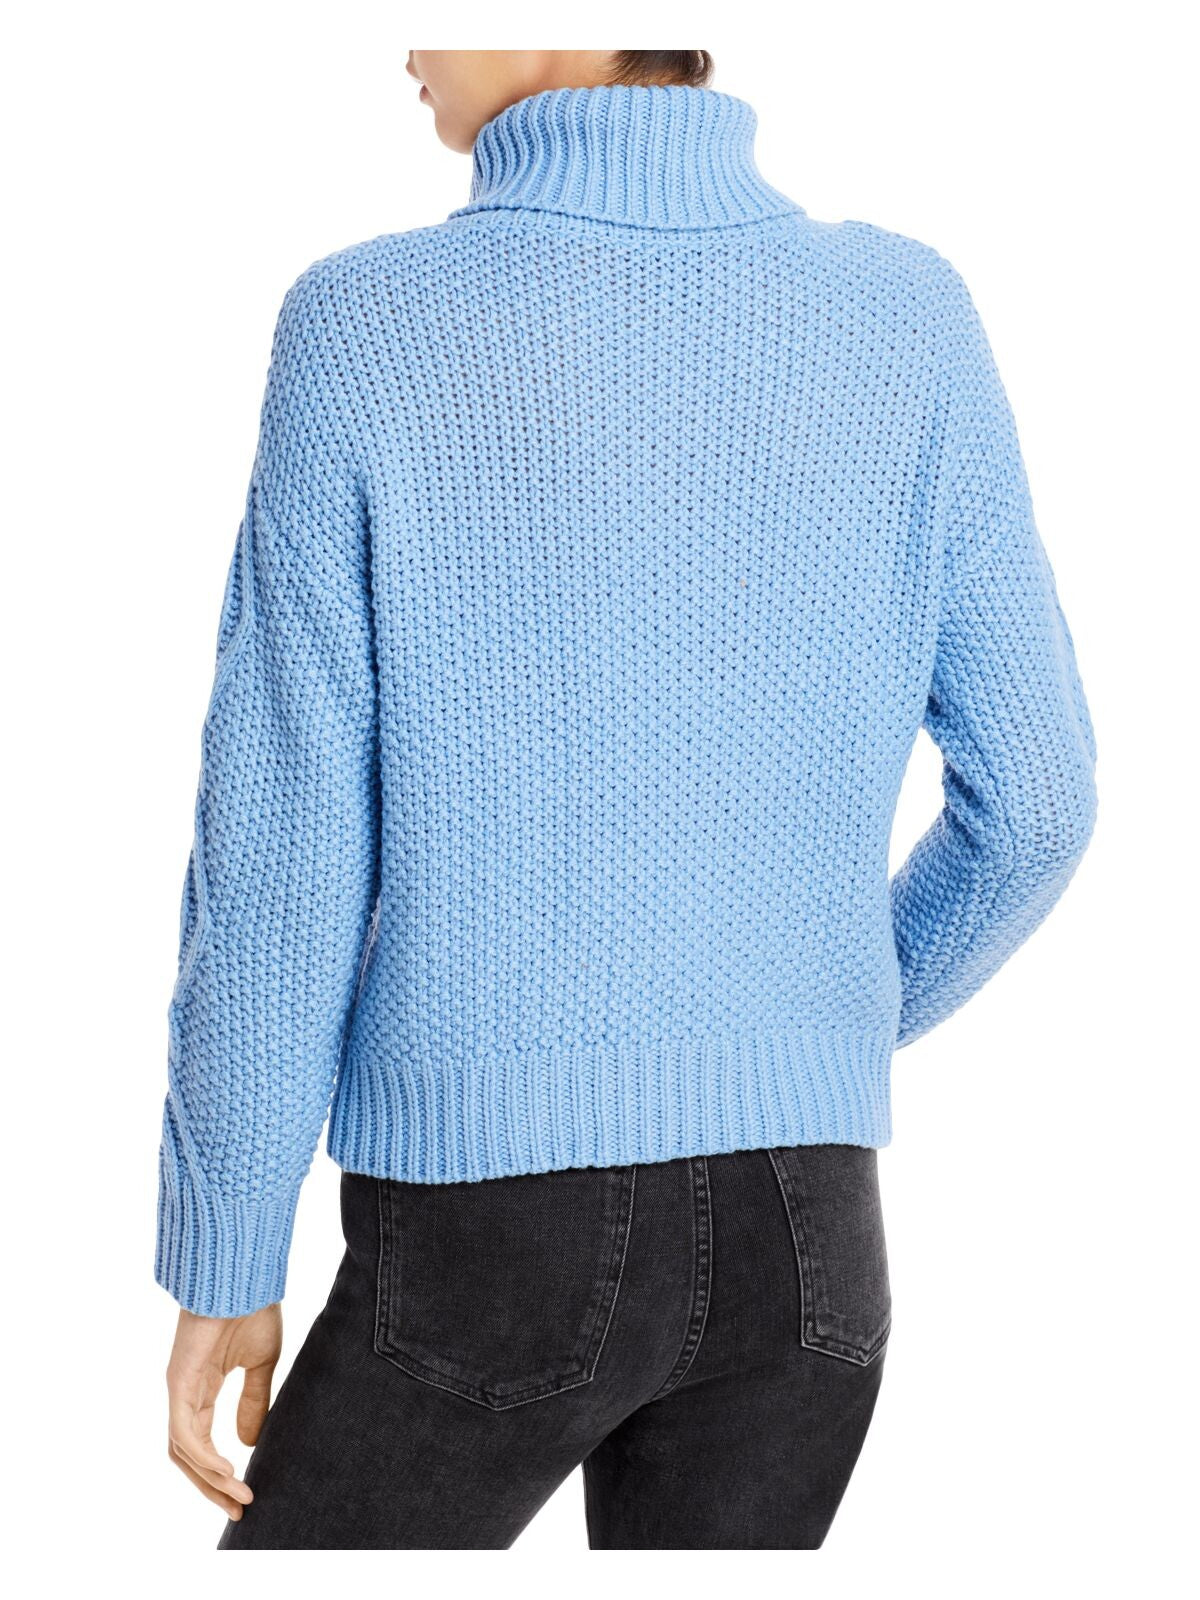 CLICHE' Womens Blue Long Sleeve Turtle Neck Sweater M